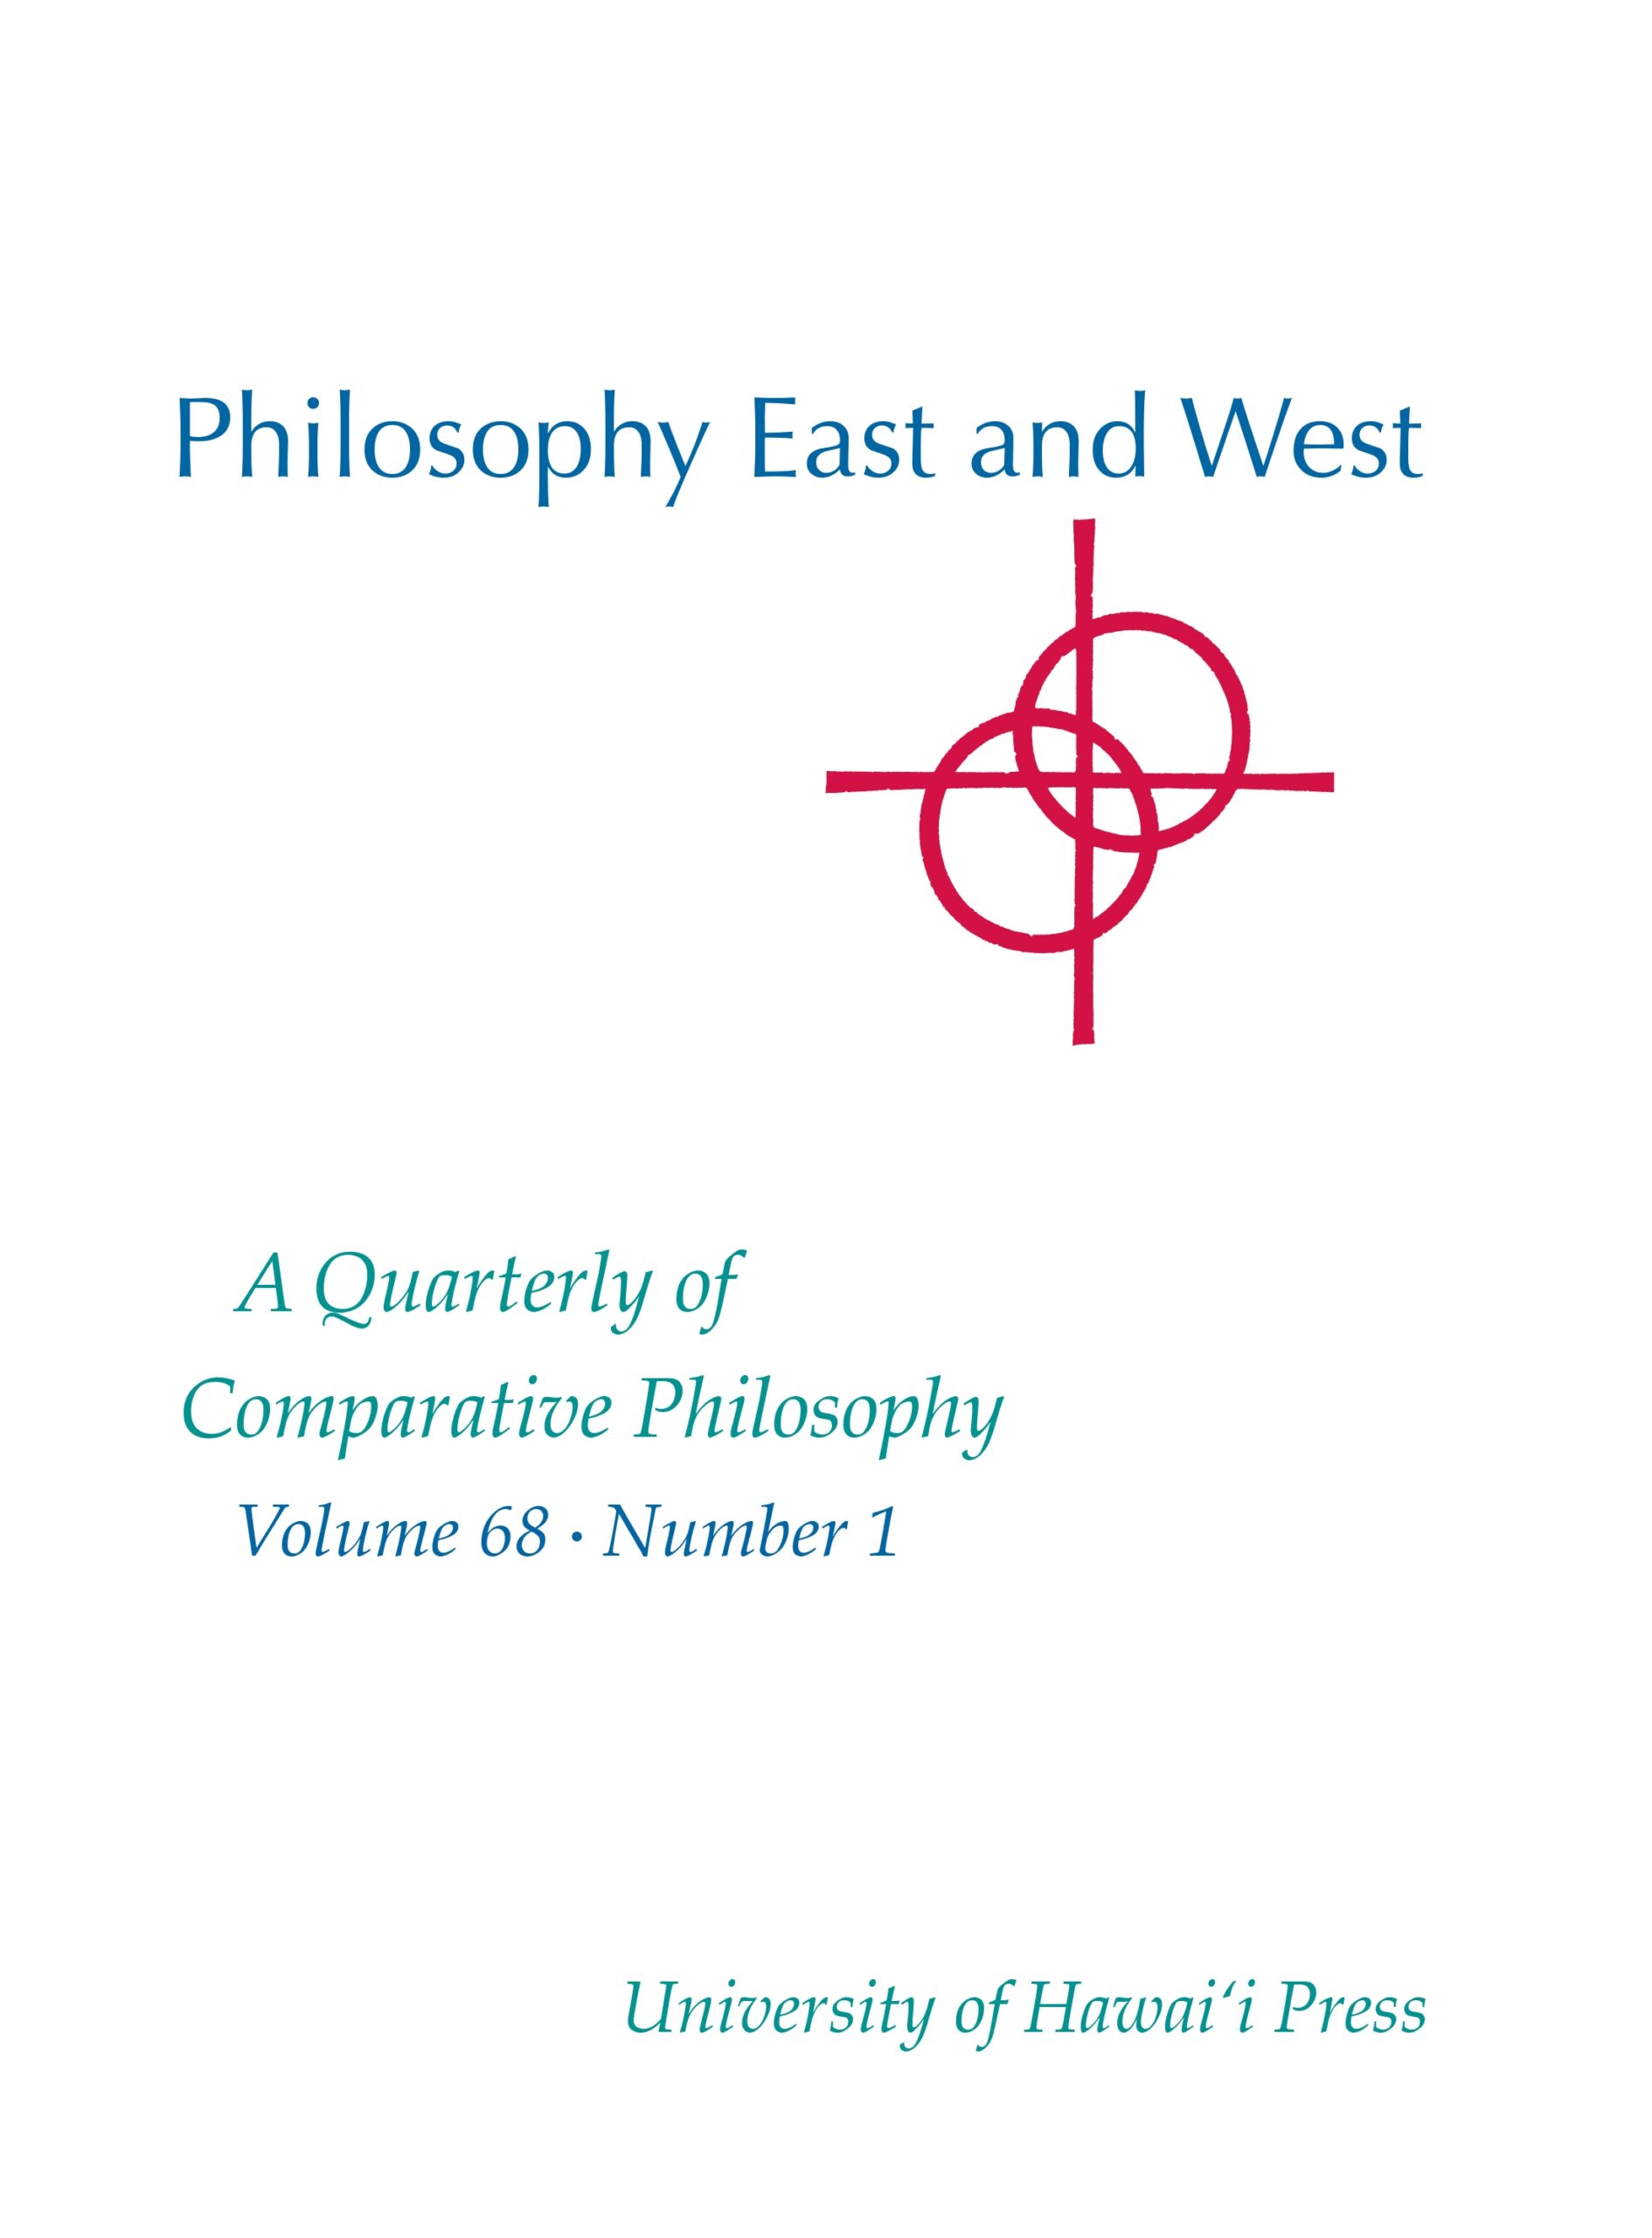 Philosophy East and West, vol. 68, no. 1 (January 2018)